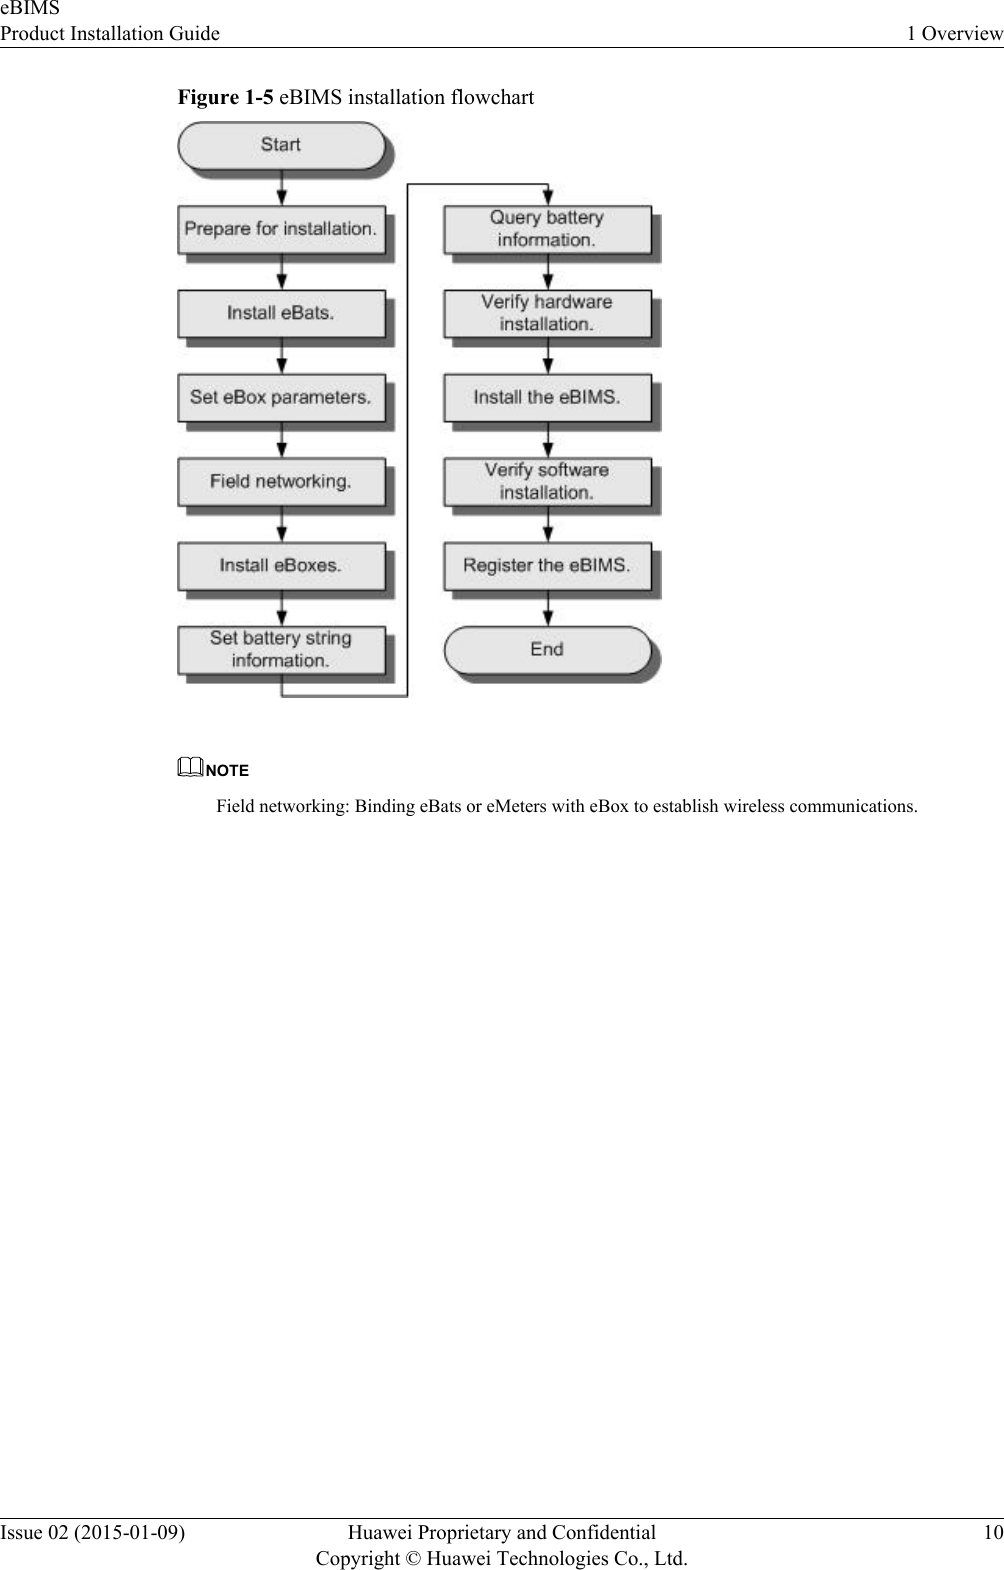 Figure 1-5 eBIMS installation flowchartNOTEField networking: Binding eBats or eMeters with eBox to establish wireless communications.eBIMSProduct Installation Guide 1 OverviewIssue 02 (2015-01-09) Huawei Proprietary and ConfidentialCopyright © Huawei Technologies Co., Ltd.10